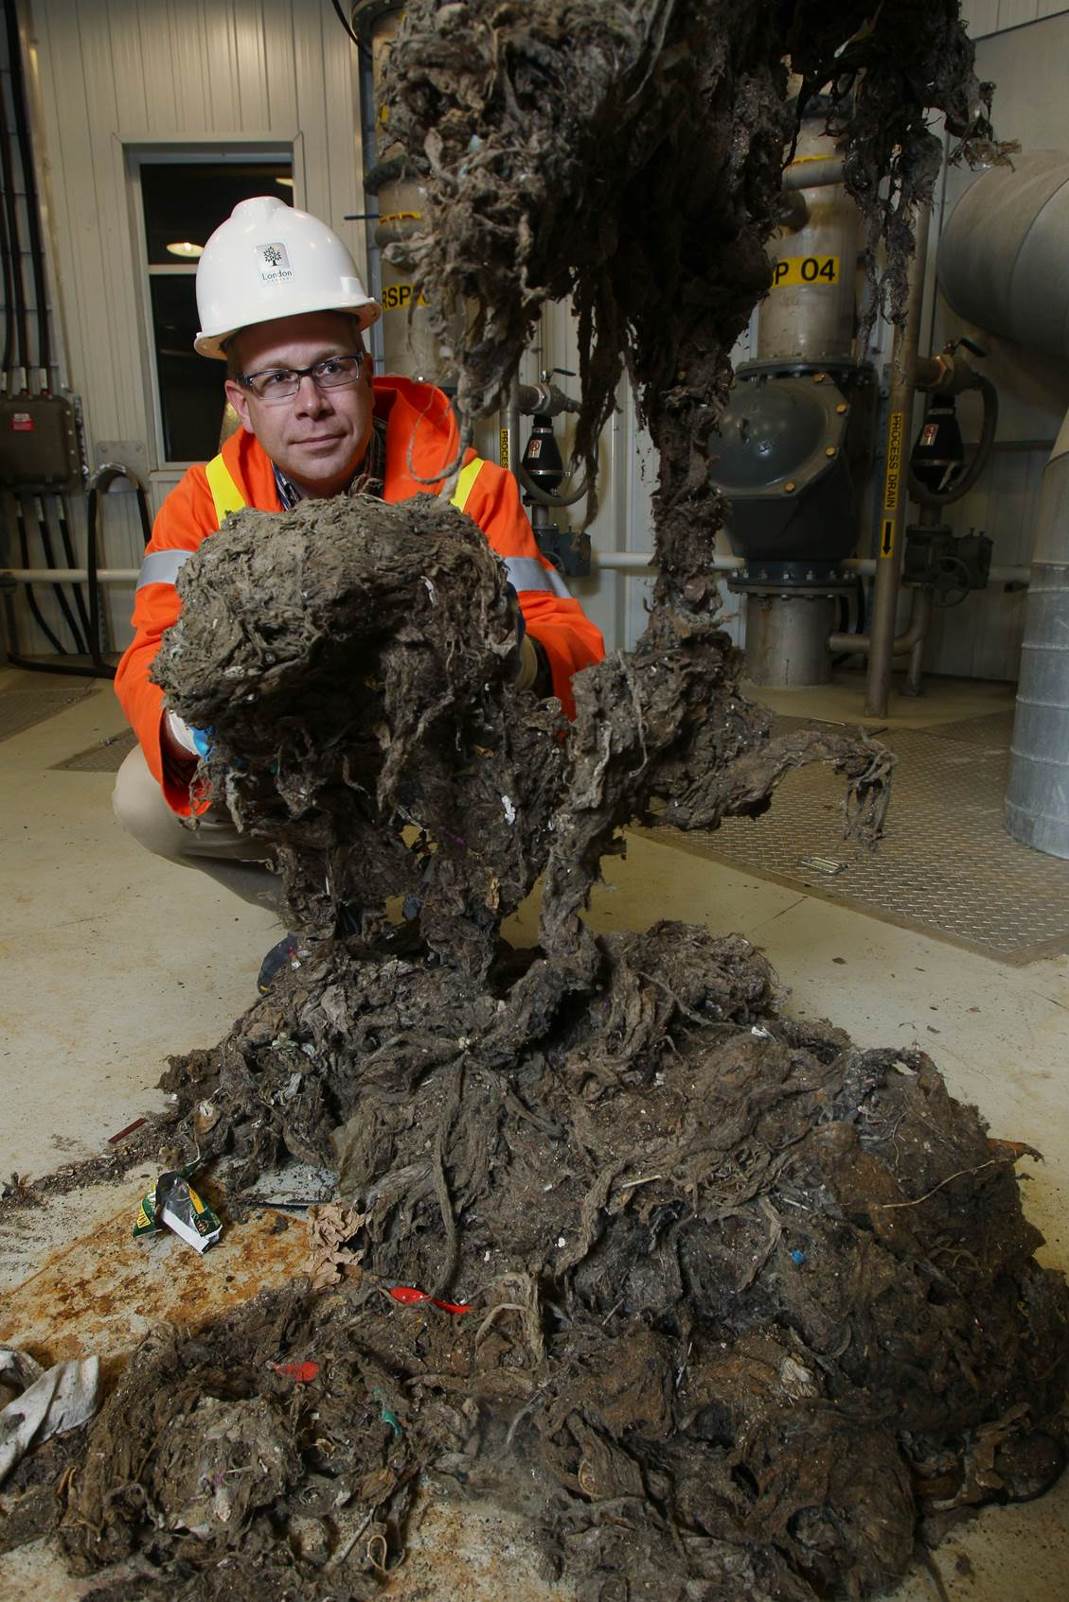 Barry holding solid waste extracted from toilet flushing lines